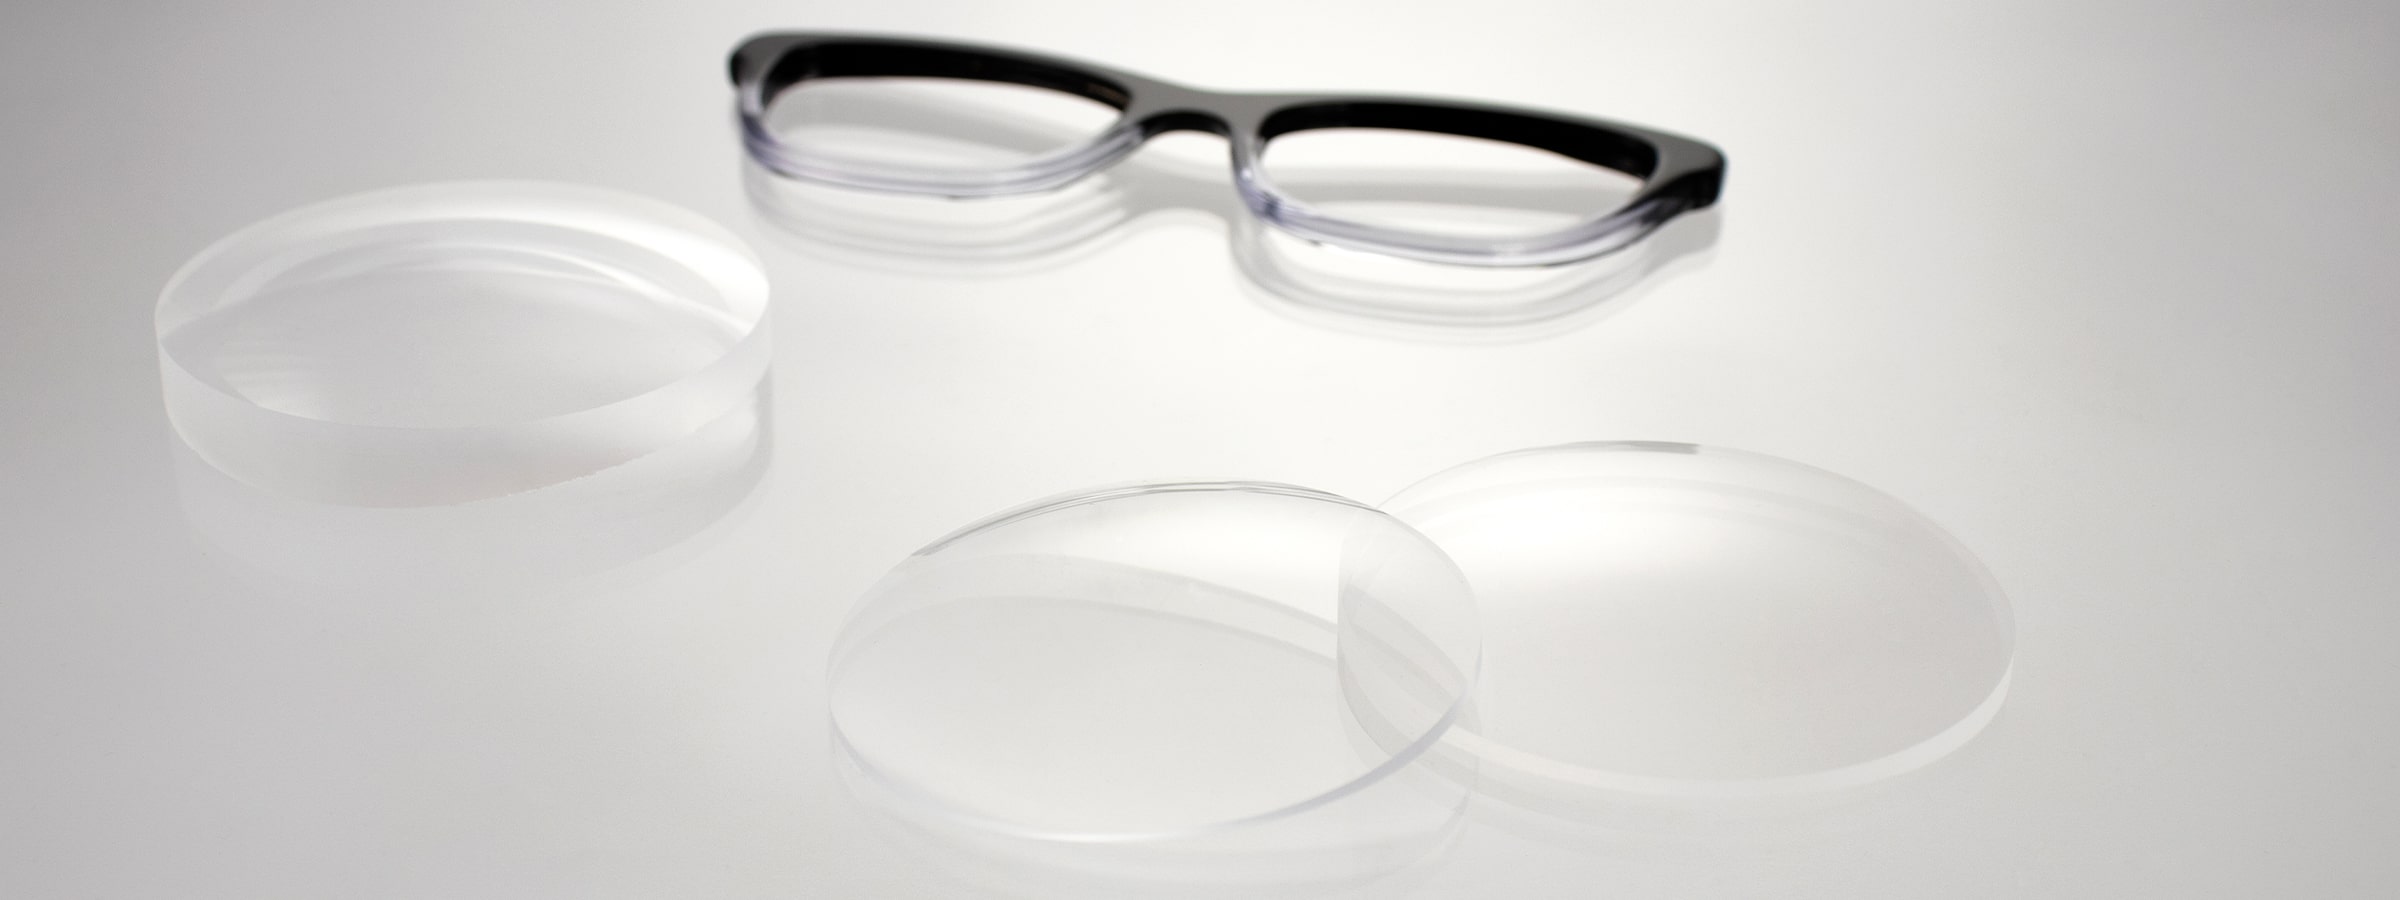 The front of a black-and-white glasses frame lying next to three uncut lenses on a table